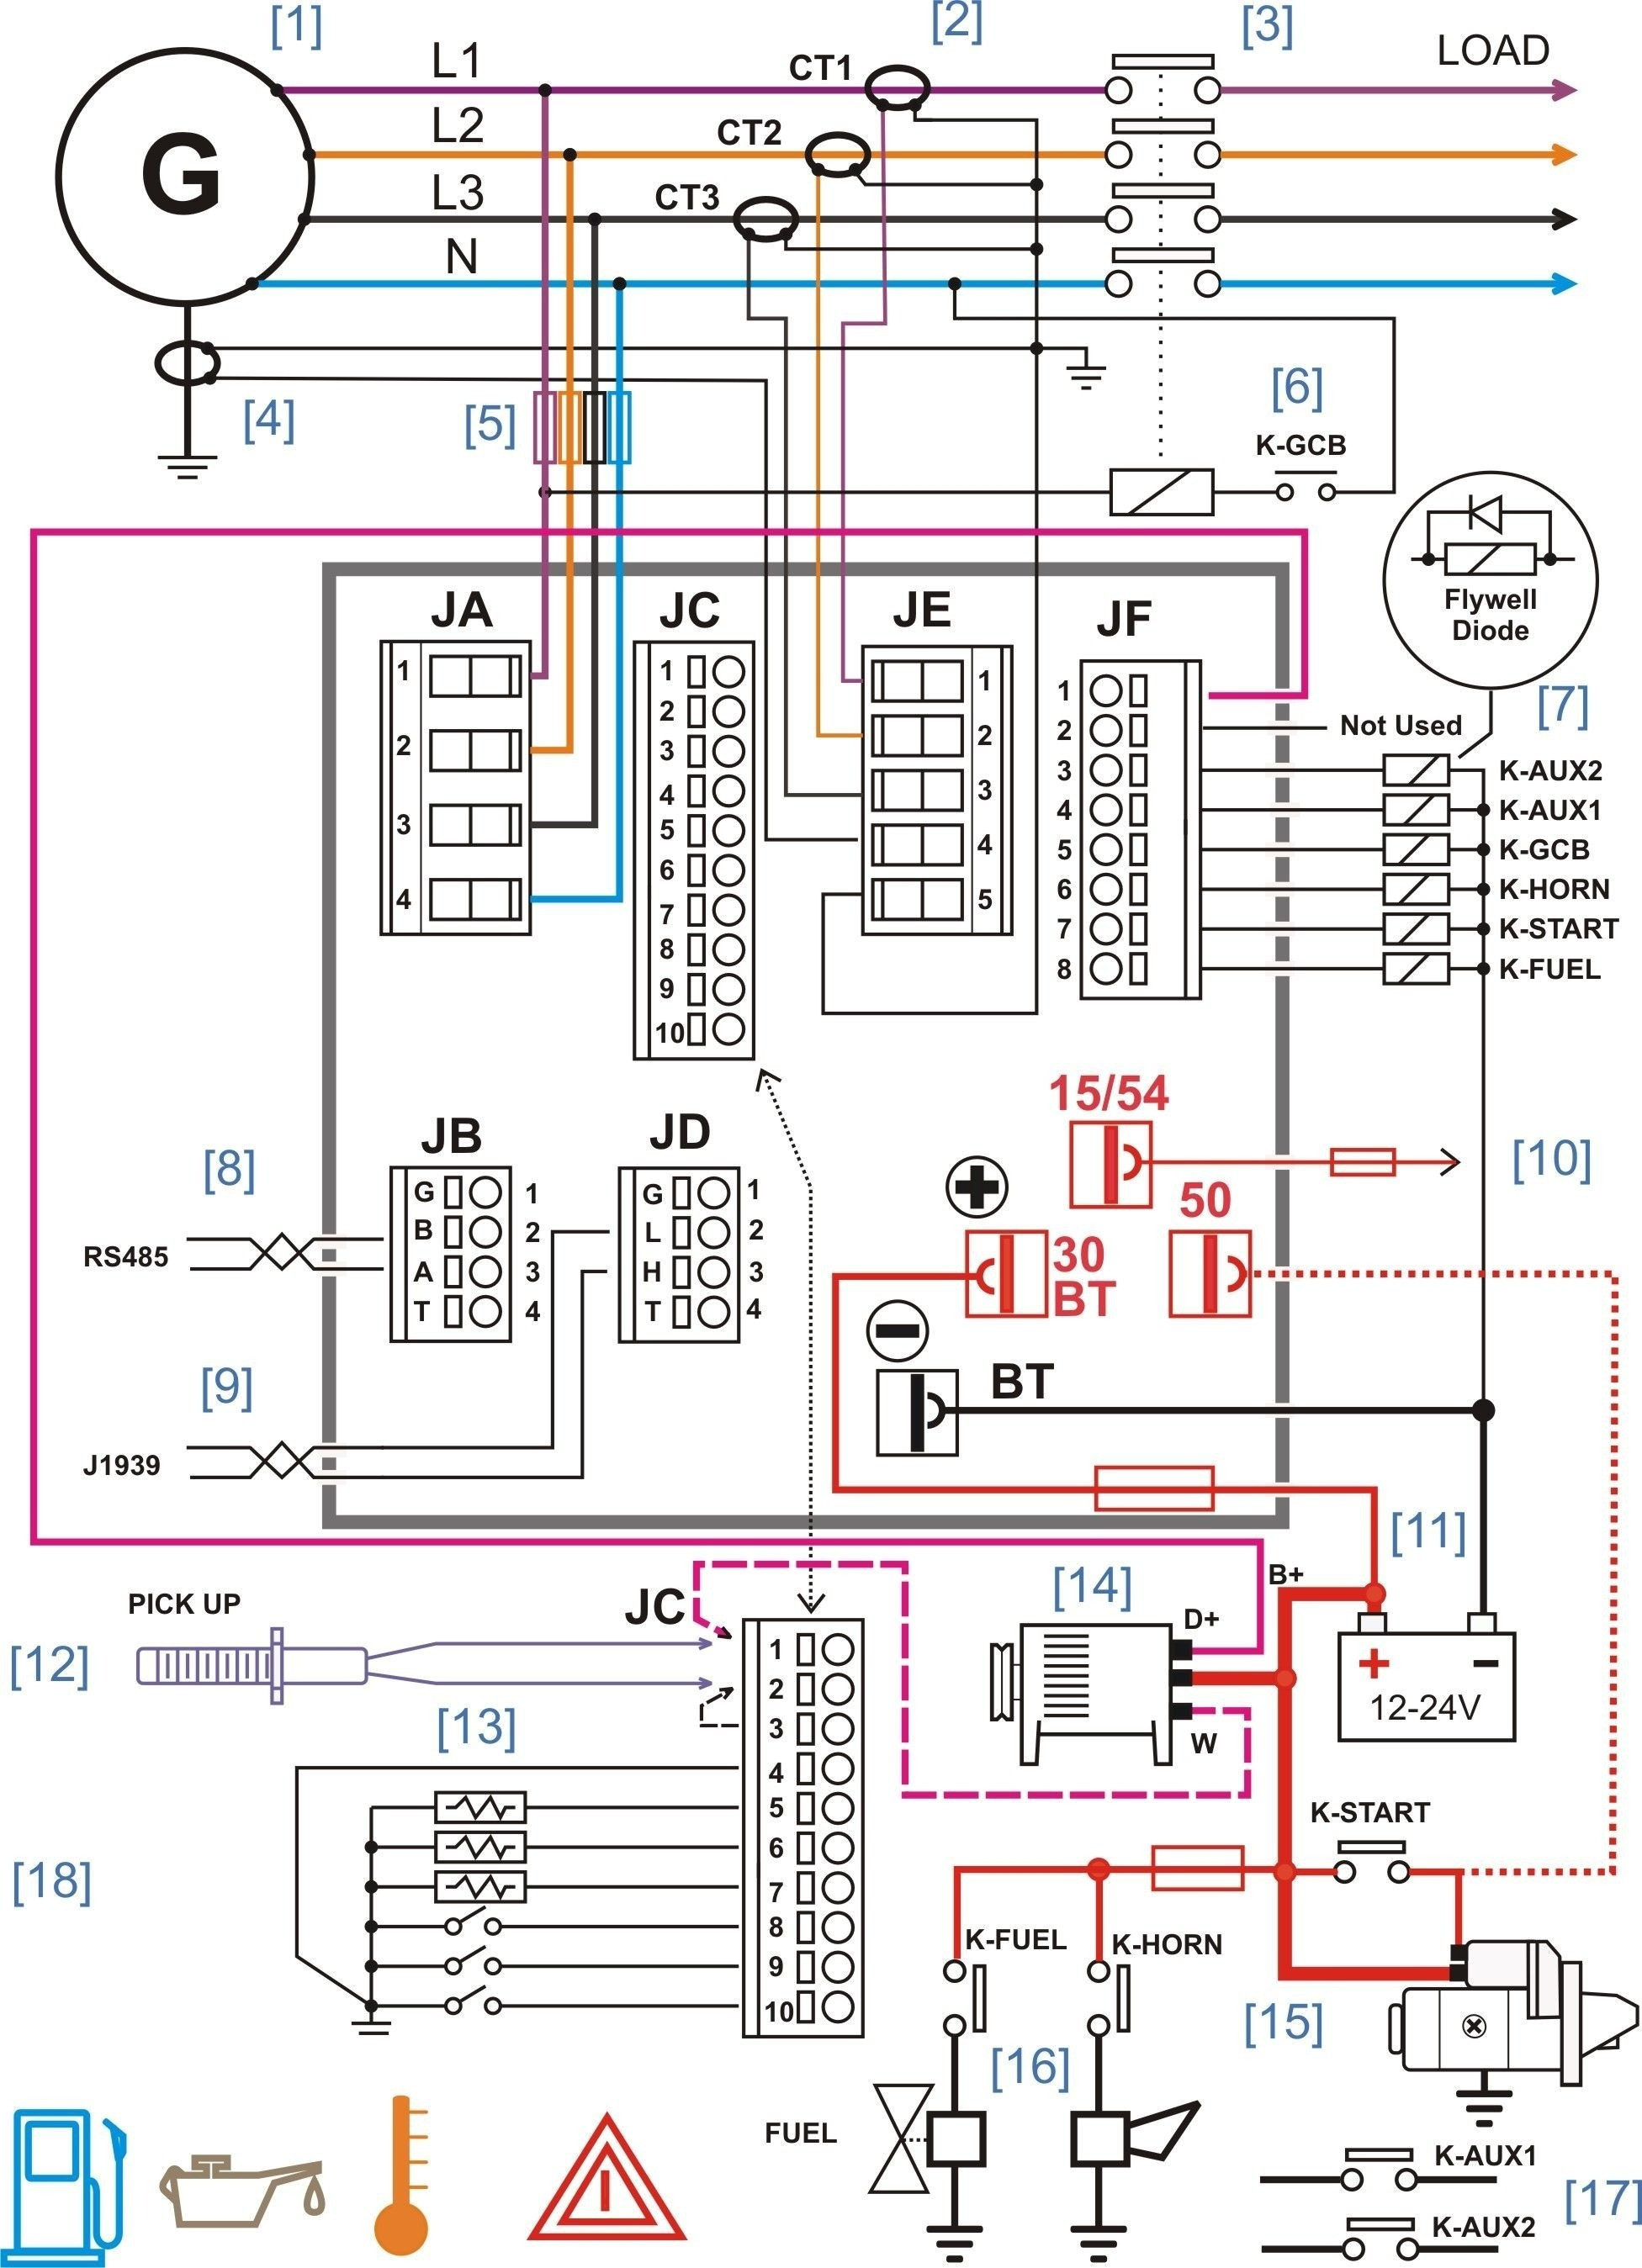 Stereo Wiring Diagram Boat - Trusted Wiring Diagram Online - Boat Stereo Wiring Diagram